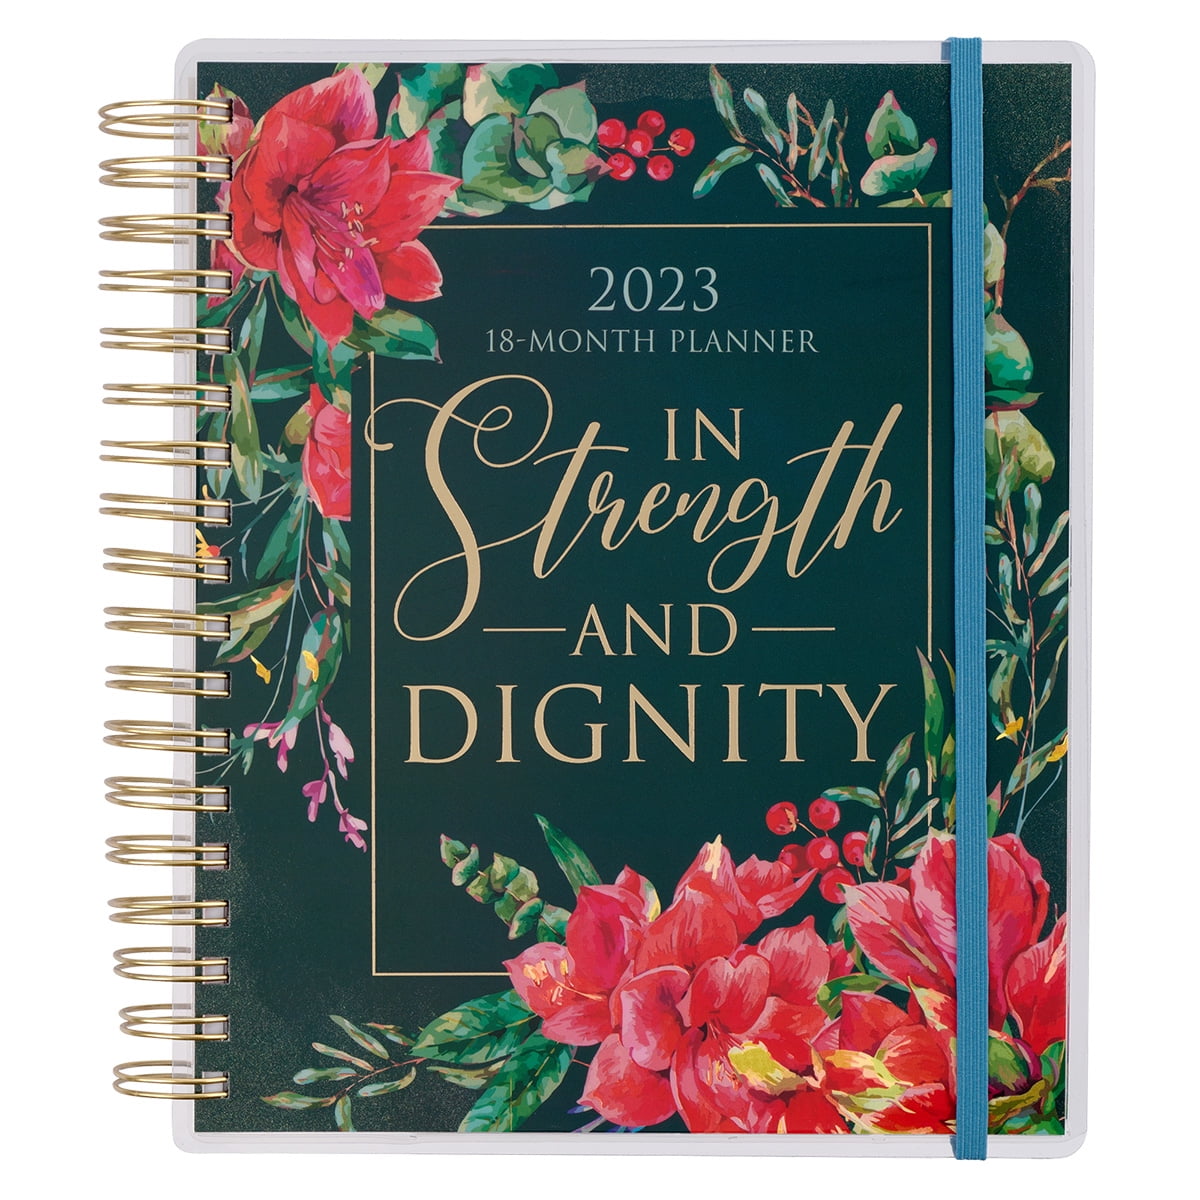 Academic/Student Year Planner 2018-2019 Daily Weekly Monthly Succulents Floral : Highschool/College/Teacher Agenda Schedule Book 